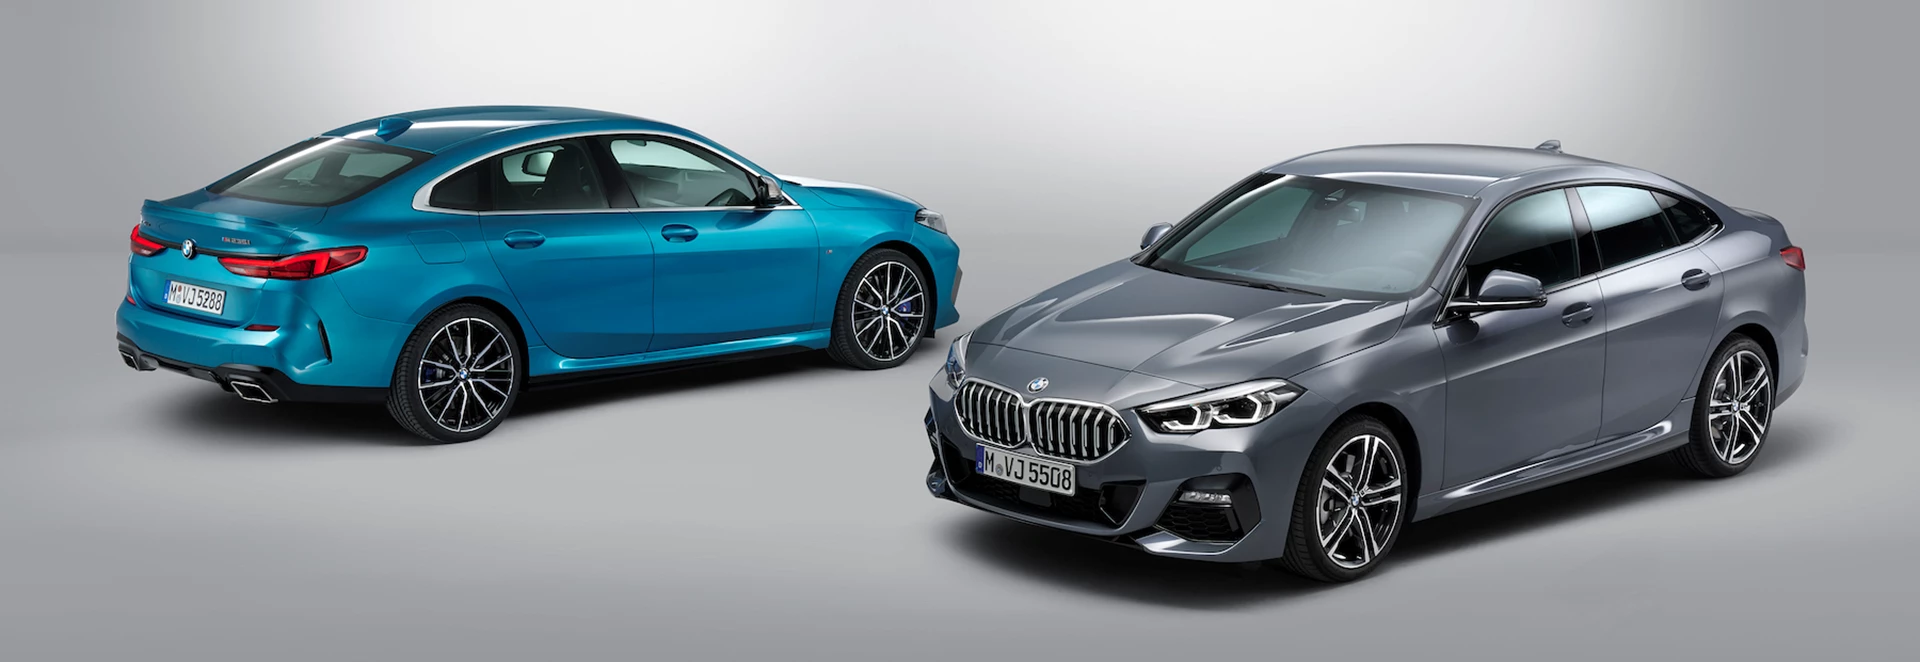 Buyer’s guide to the BMW 2 Series Gran Coupe